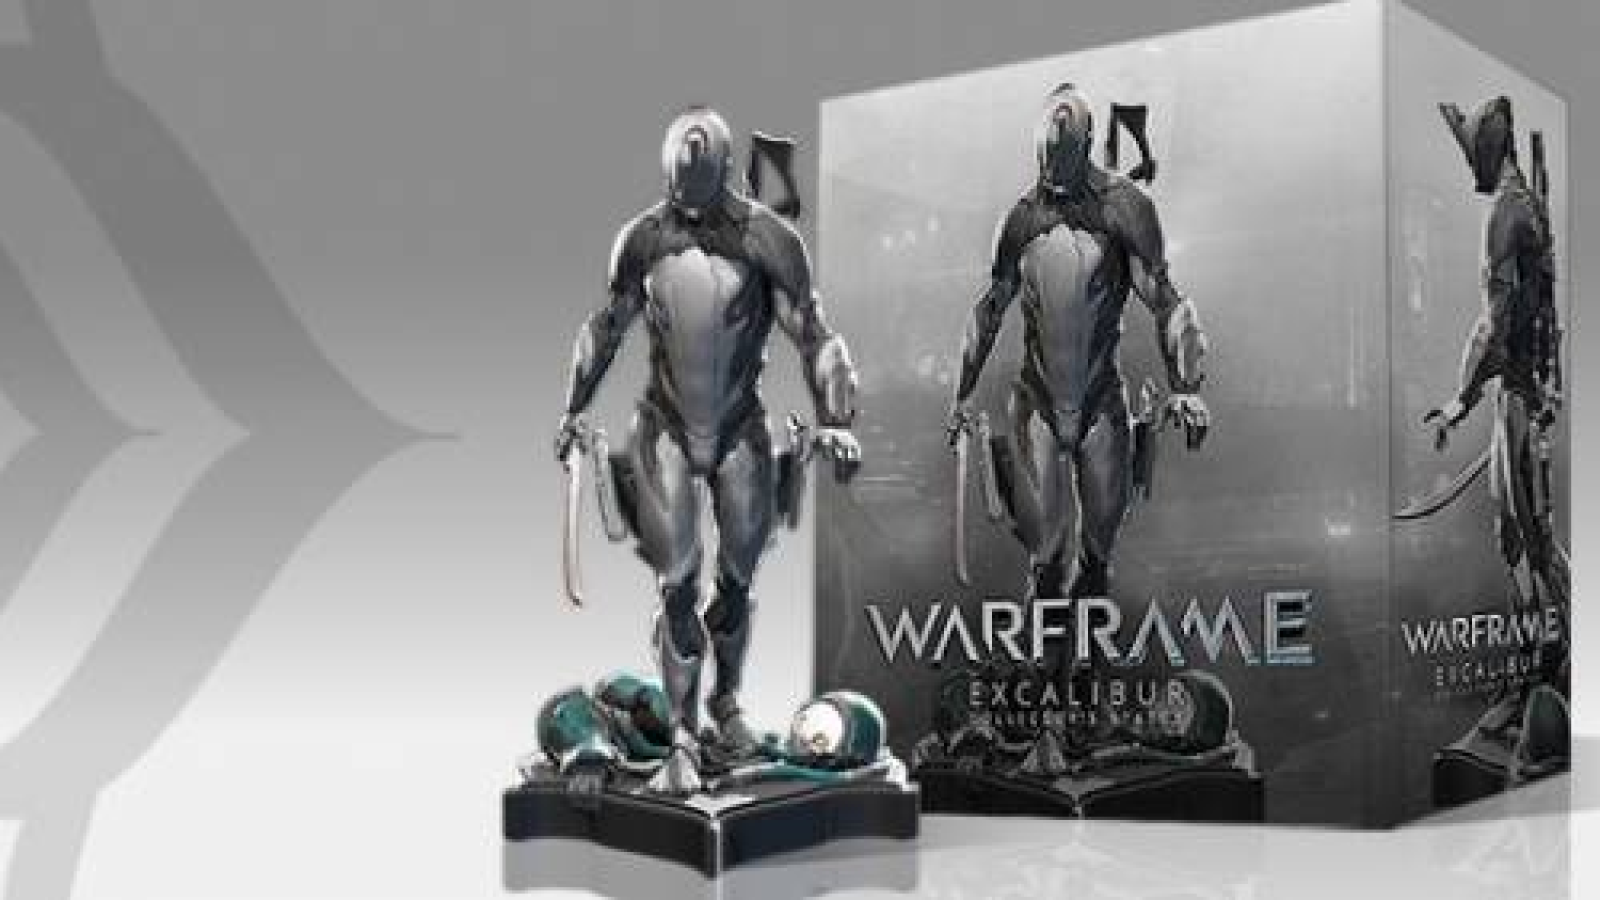 LIMITED EDITION EXCALIBUR STATUE COMING SOON 